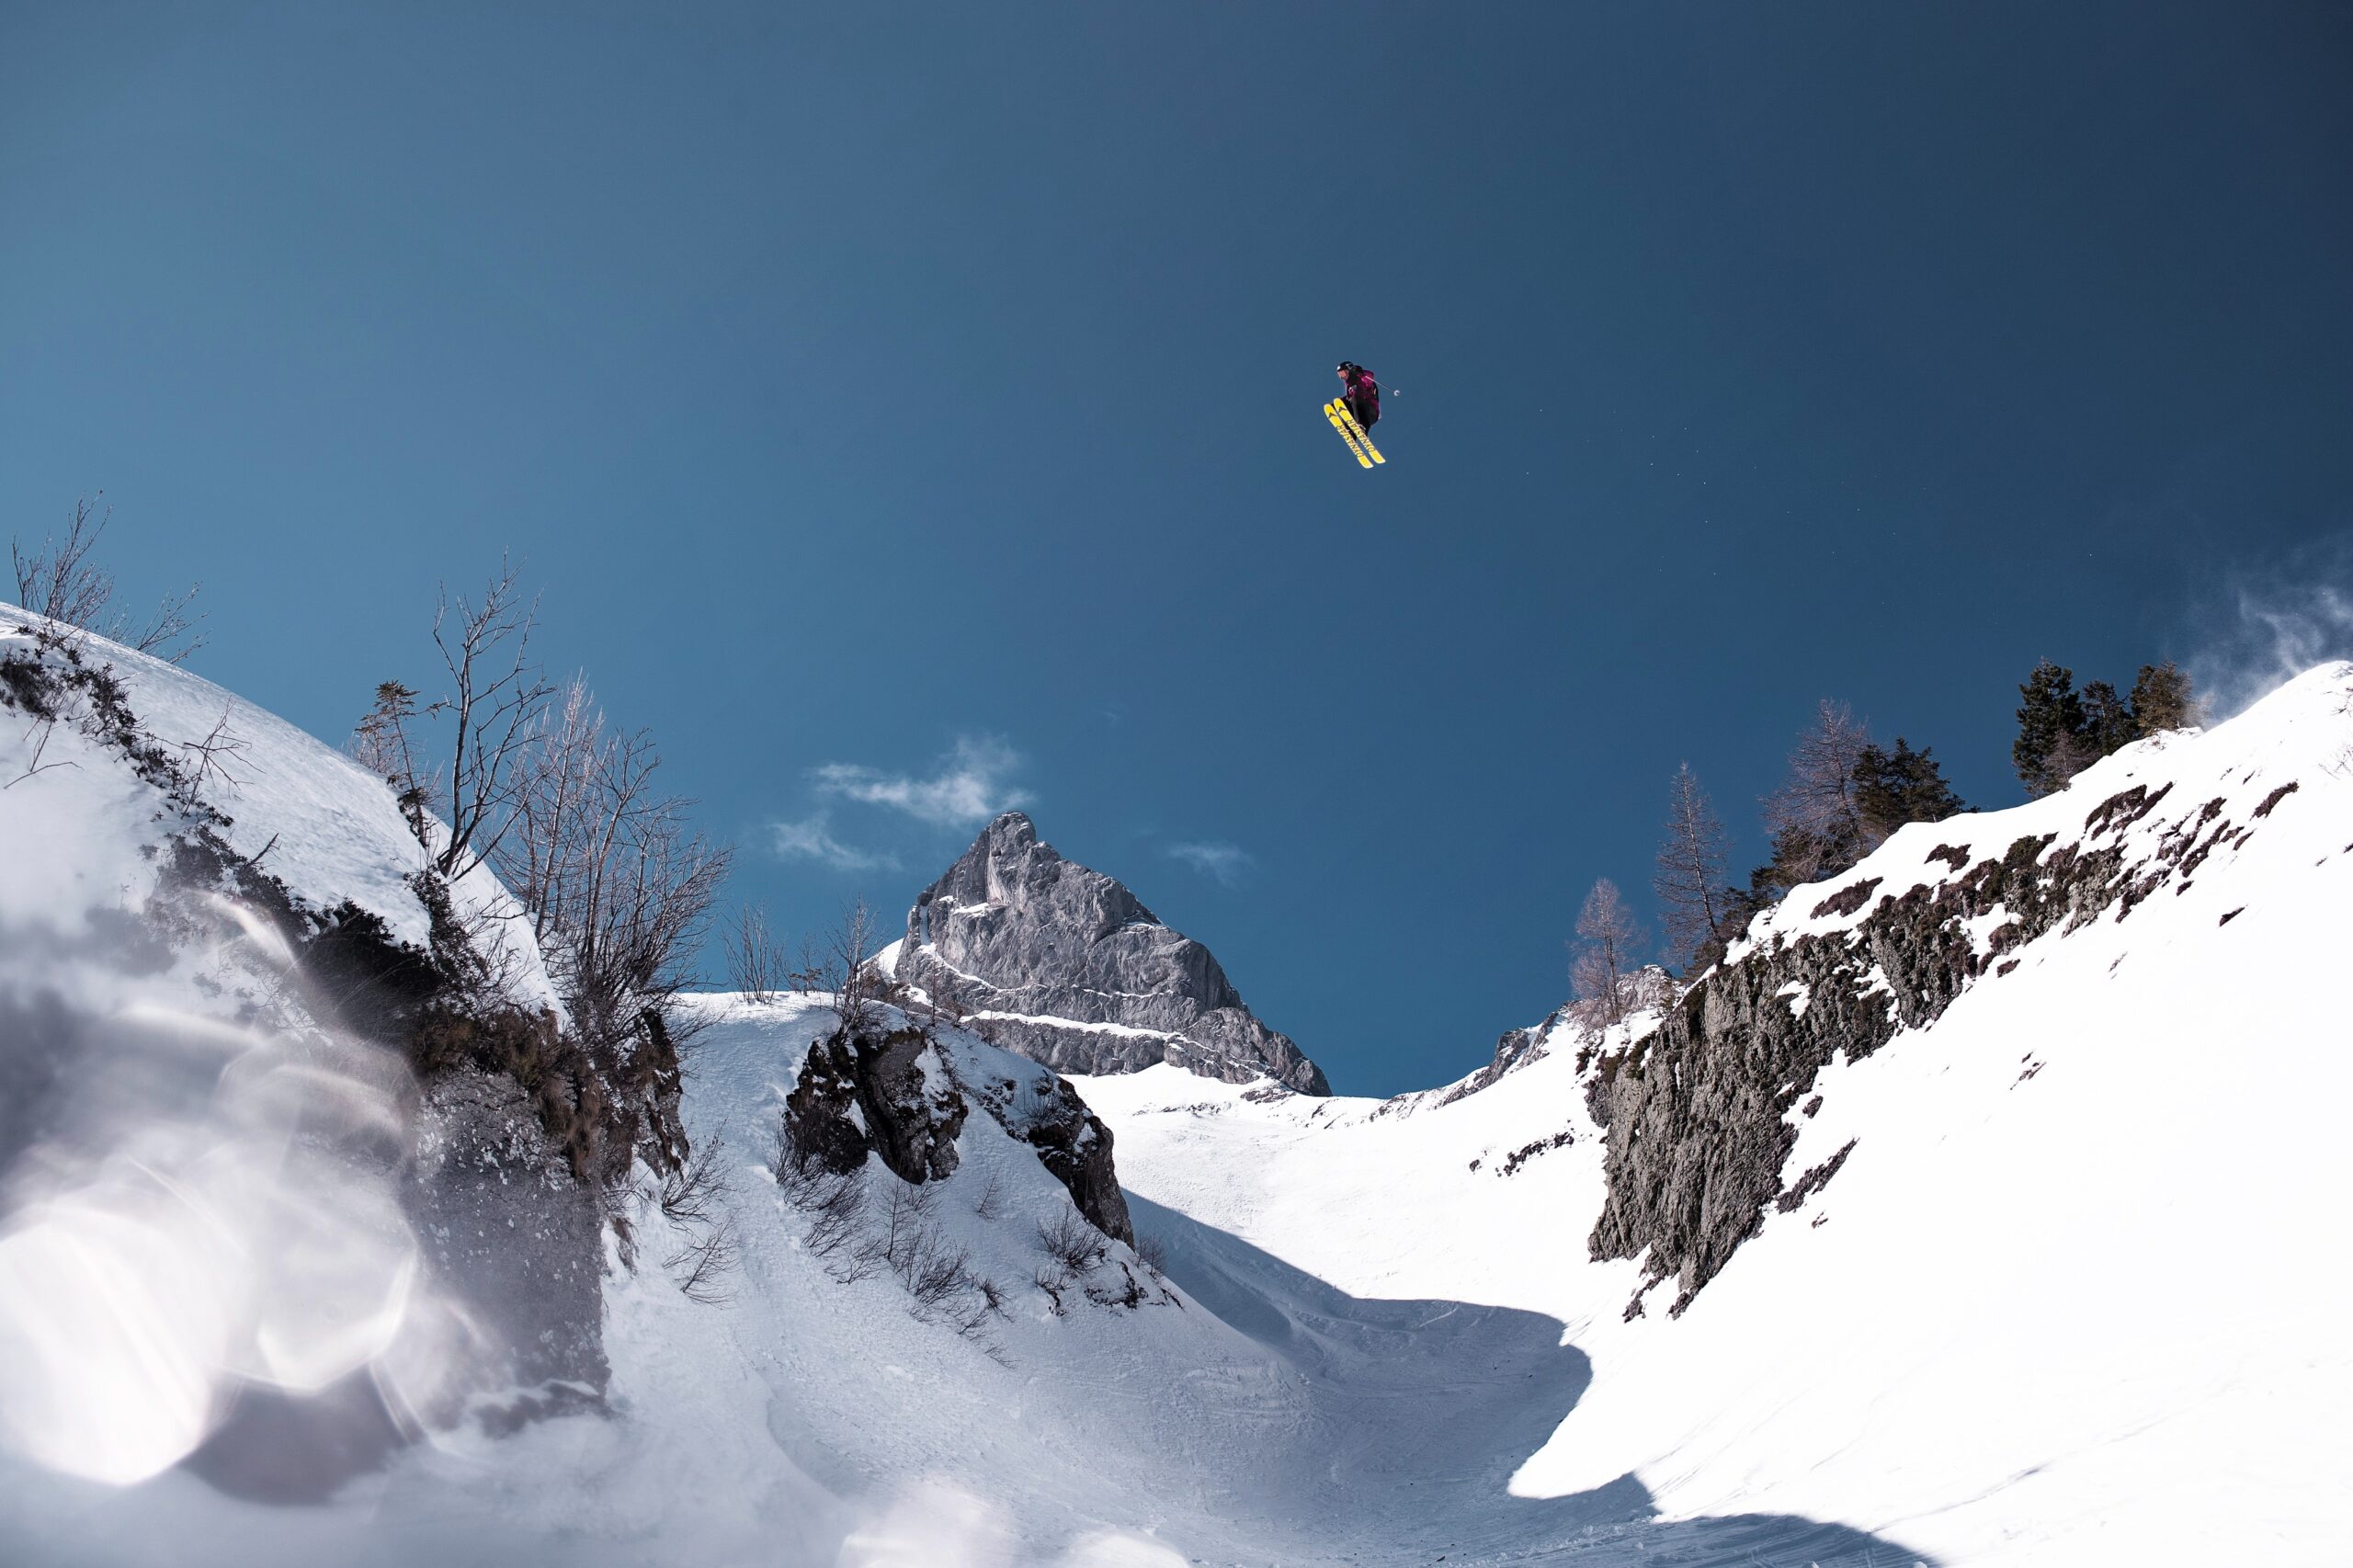 skier with huge air jumping a gap between rocks over snow